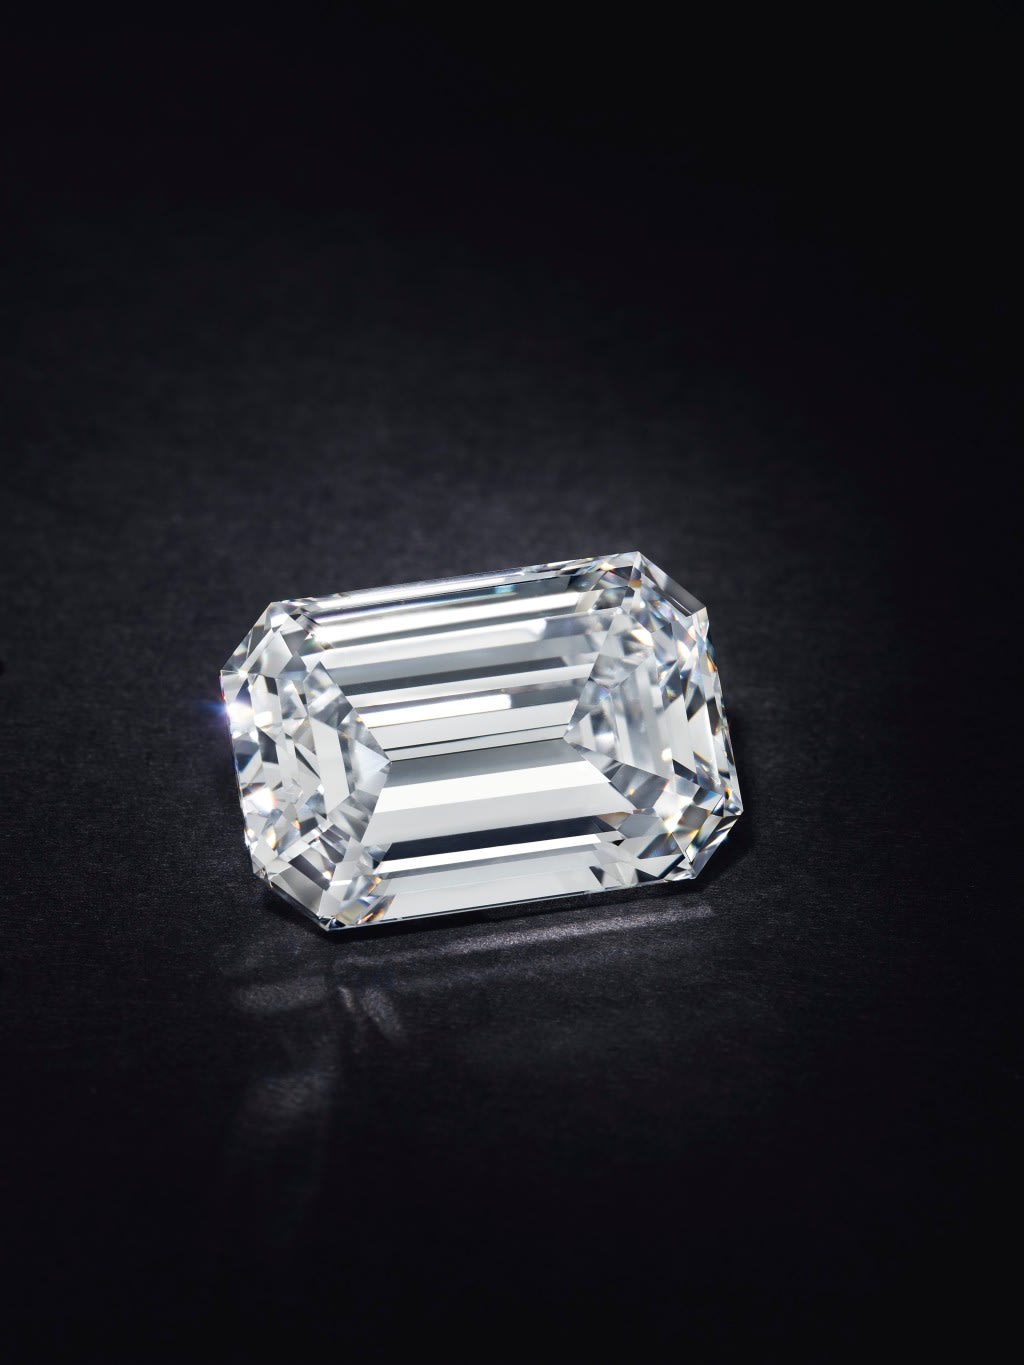 Record-Breaking Diamond Bolsters Trend for Online Auctions During Lockdown